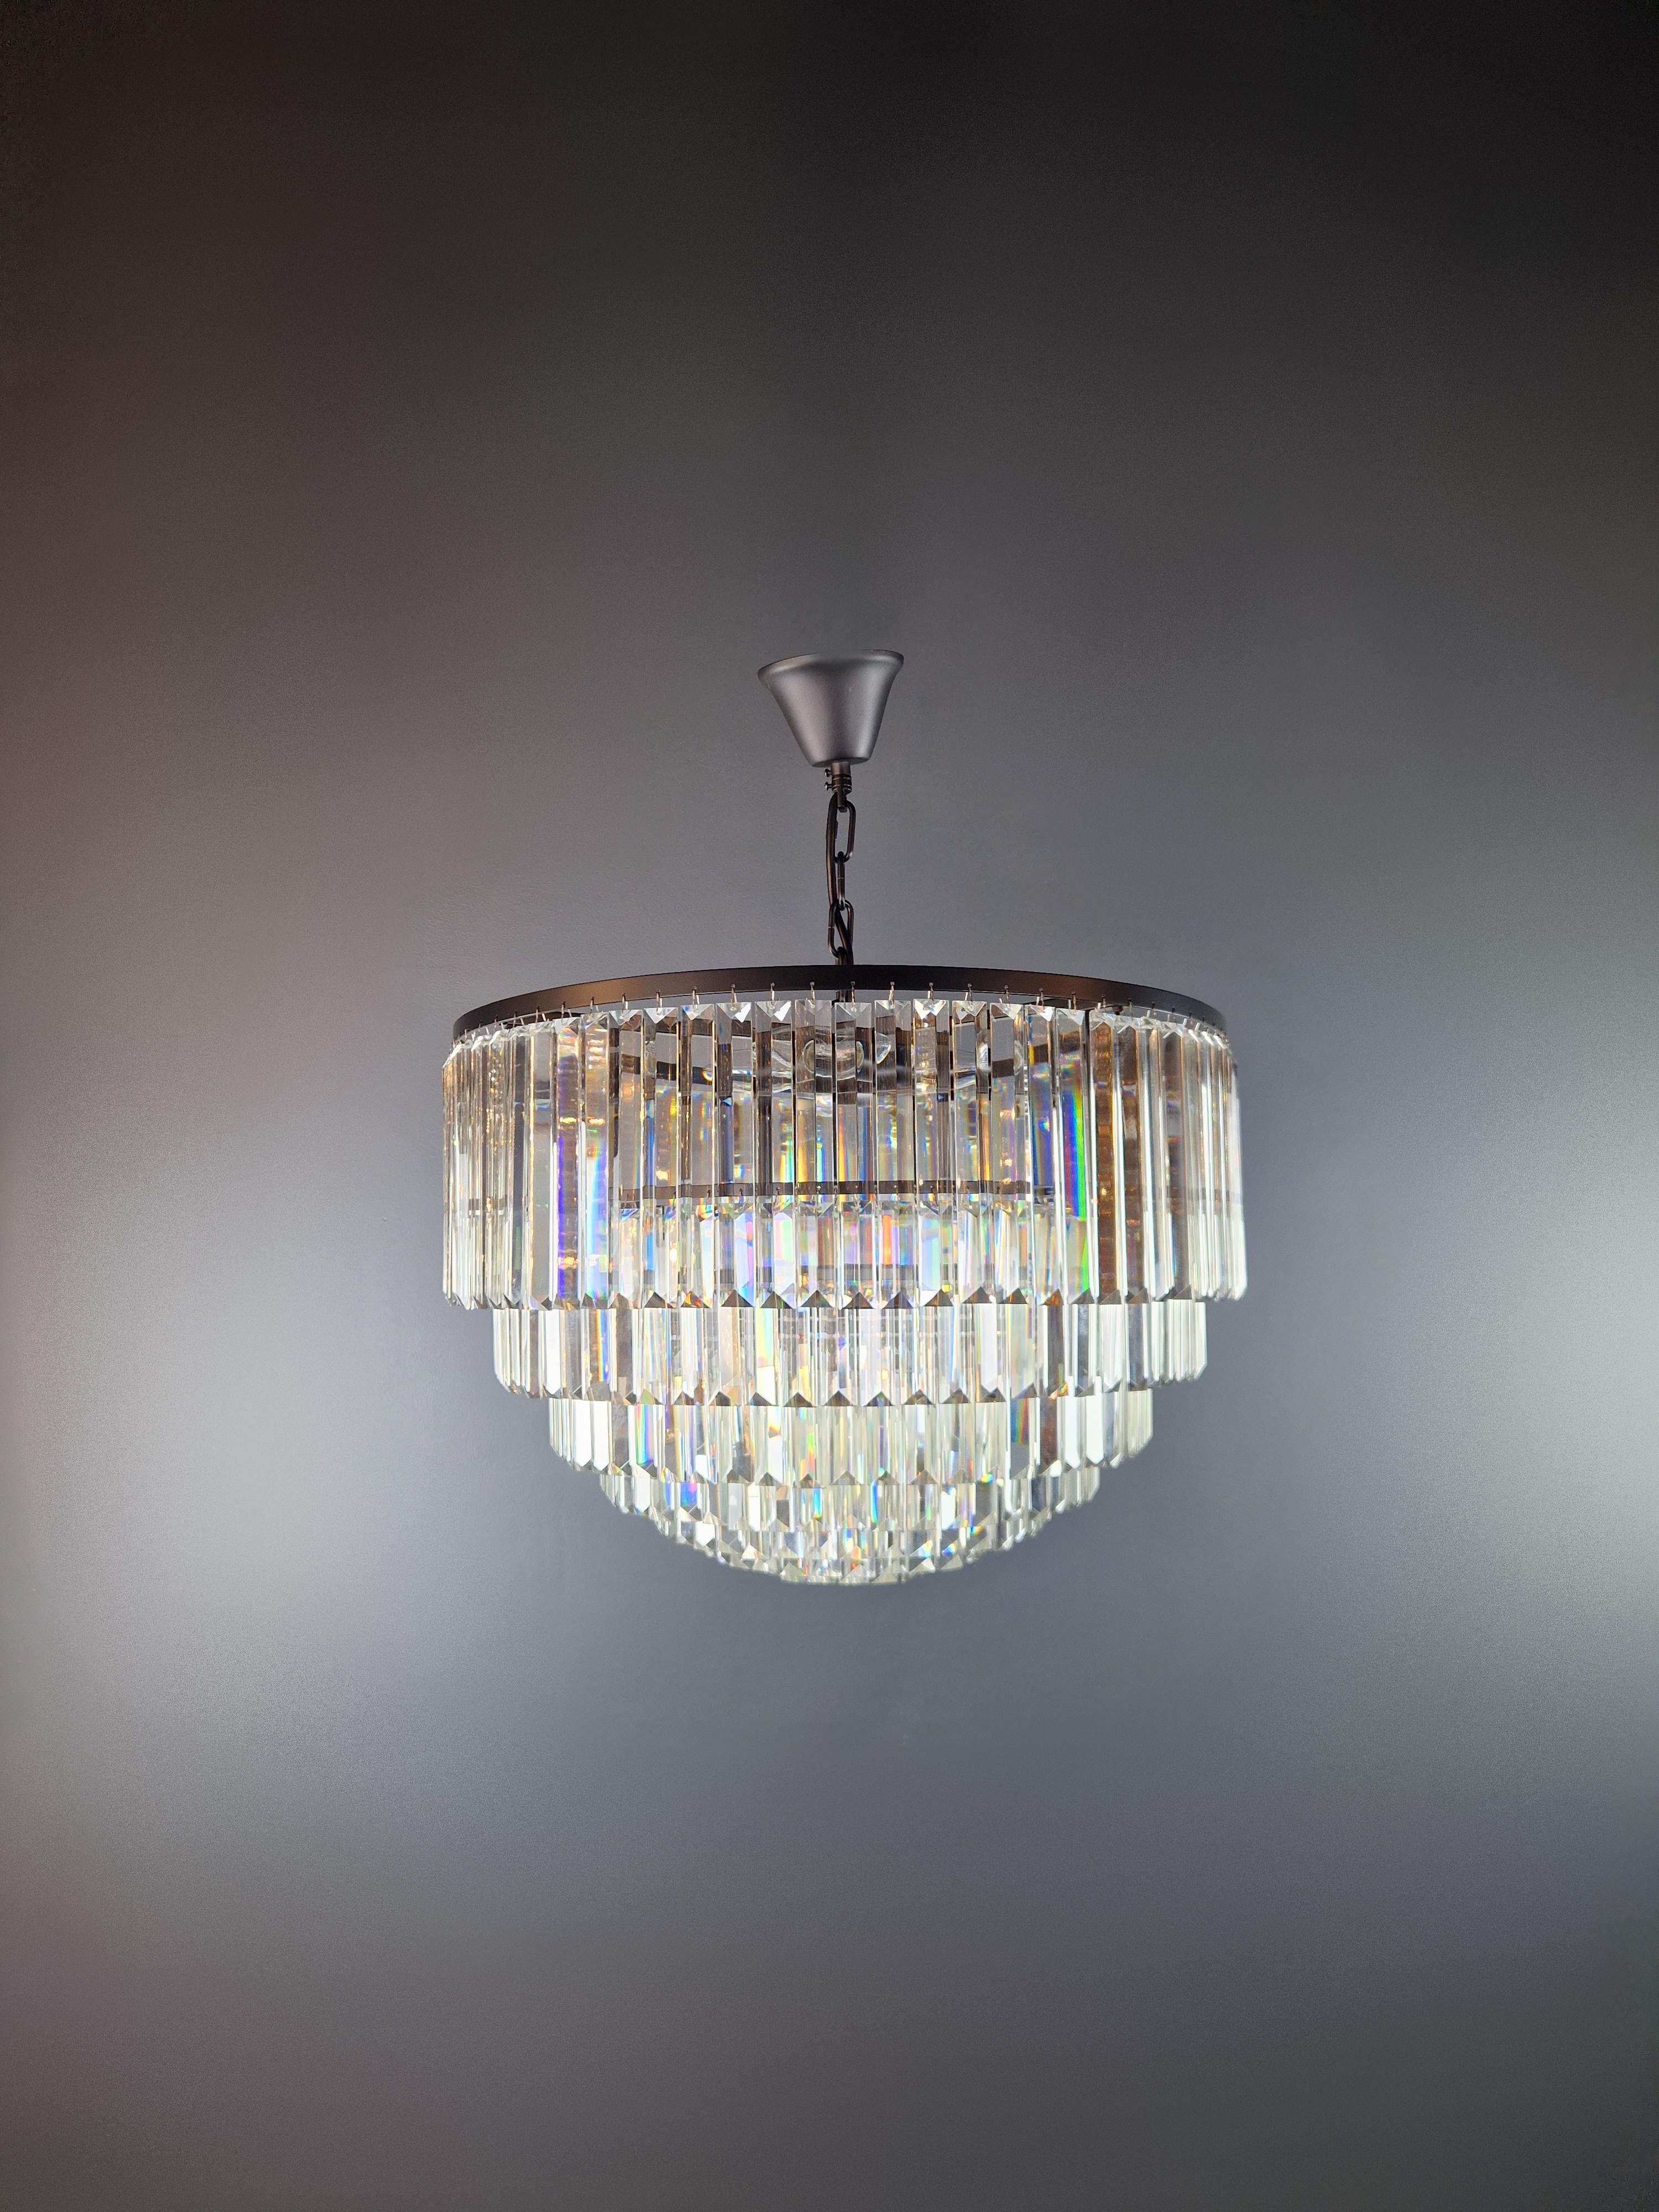 Do you want to give your home an avant-garde touch? Are you looking for a lighting solution that pushes the boundaries of design? Our postmodern chandelier is the answer to all your desires.

Dimensions:

Height: 40cm
Diameter: 60cm
This fascinating